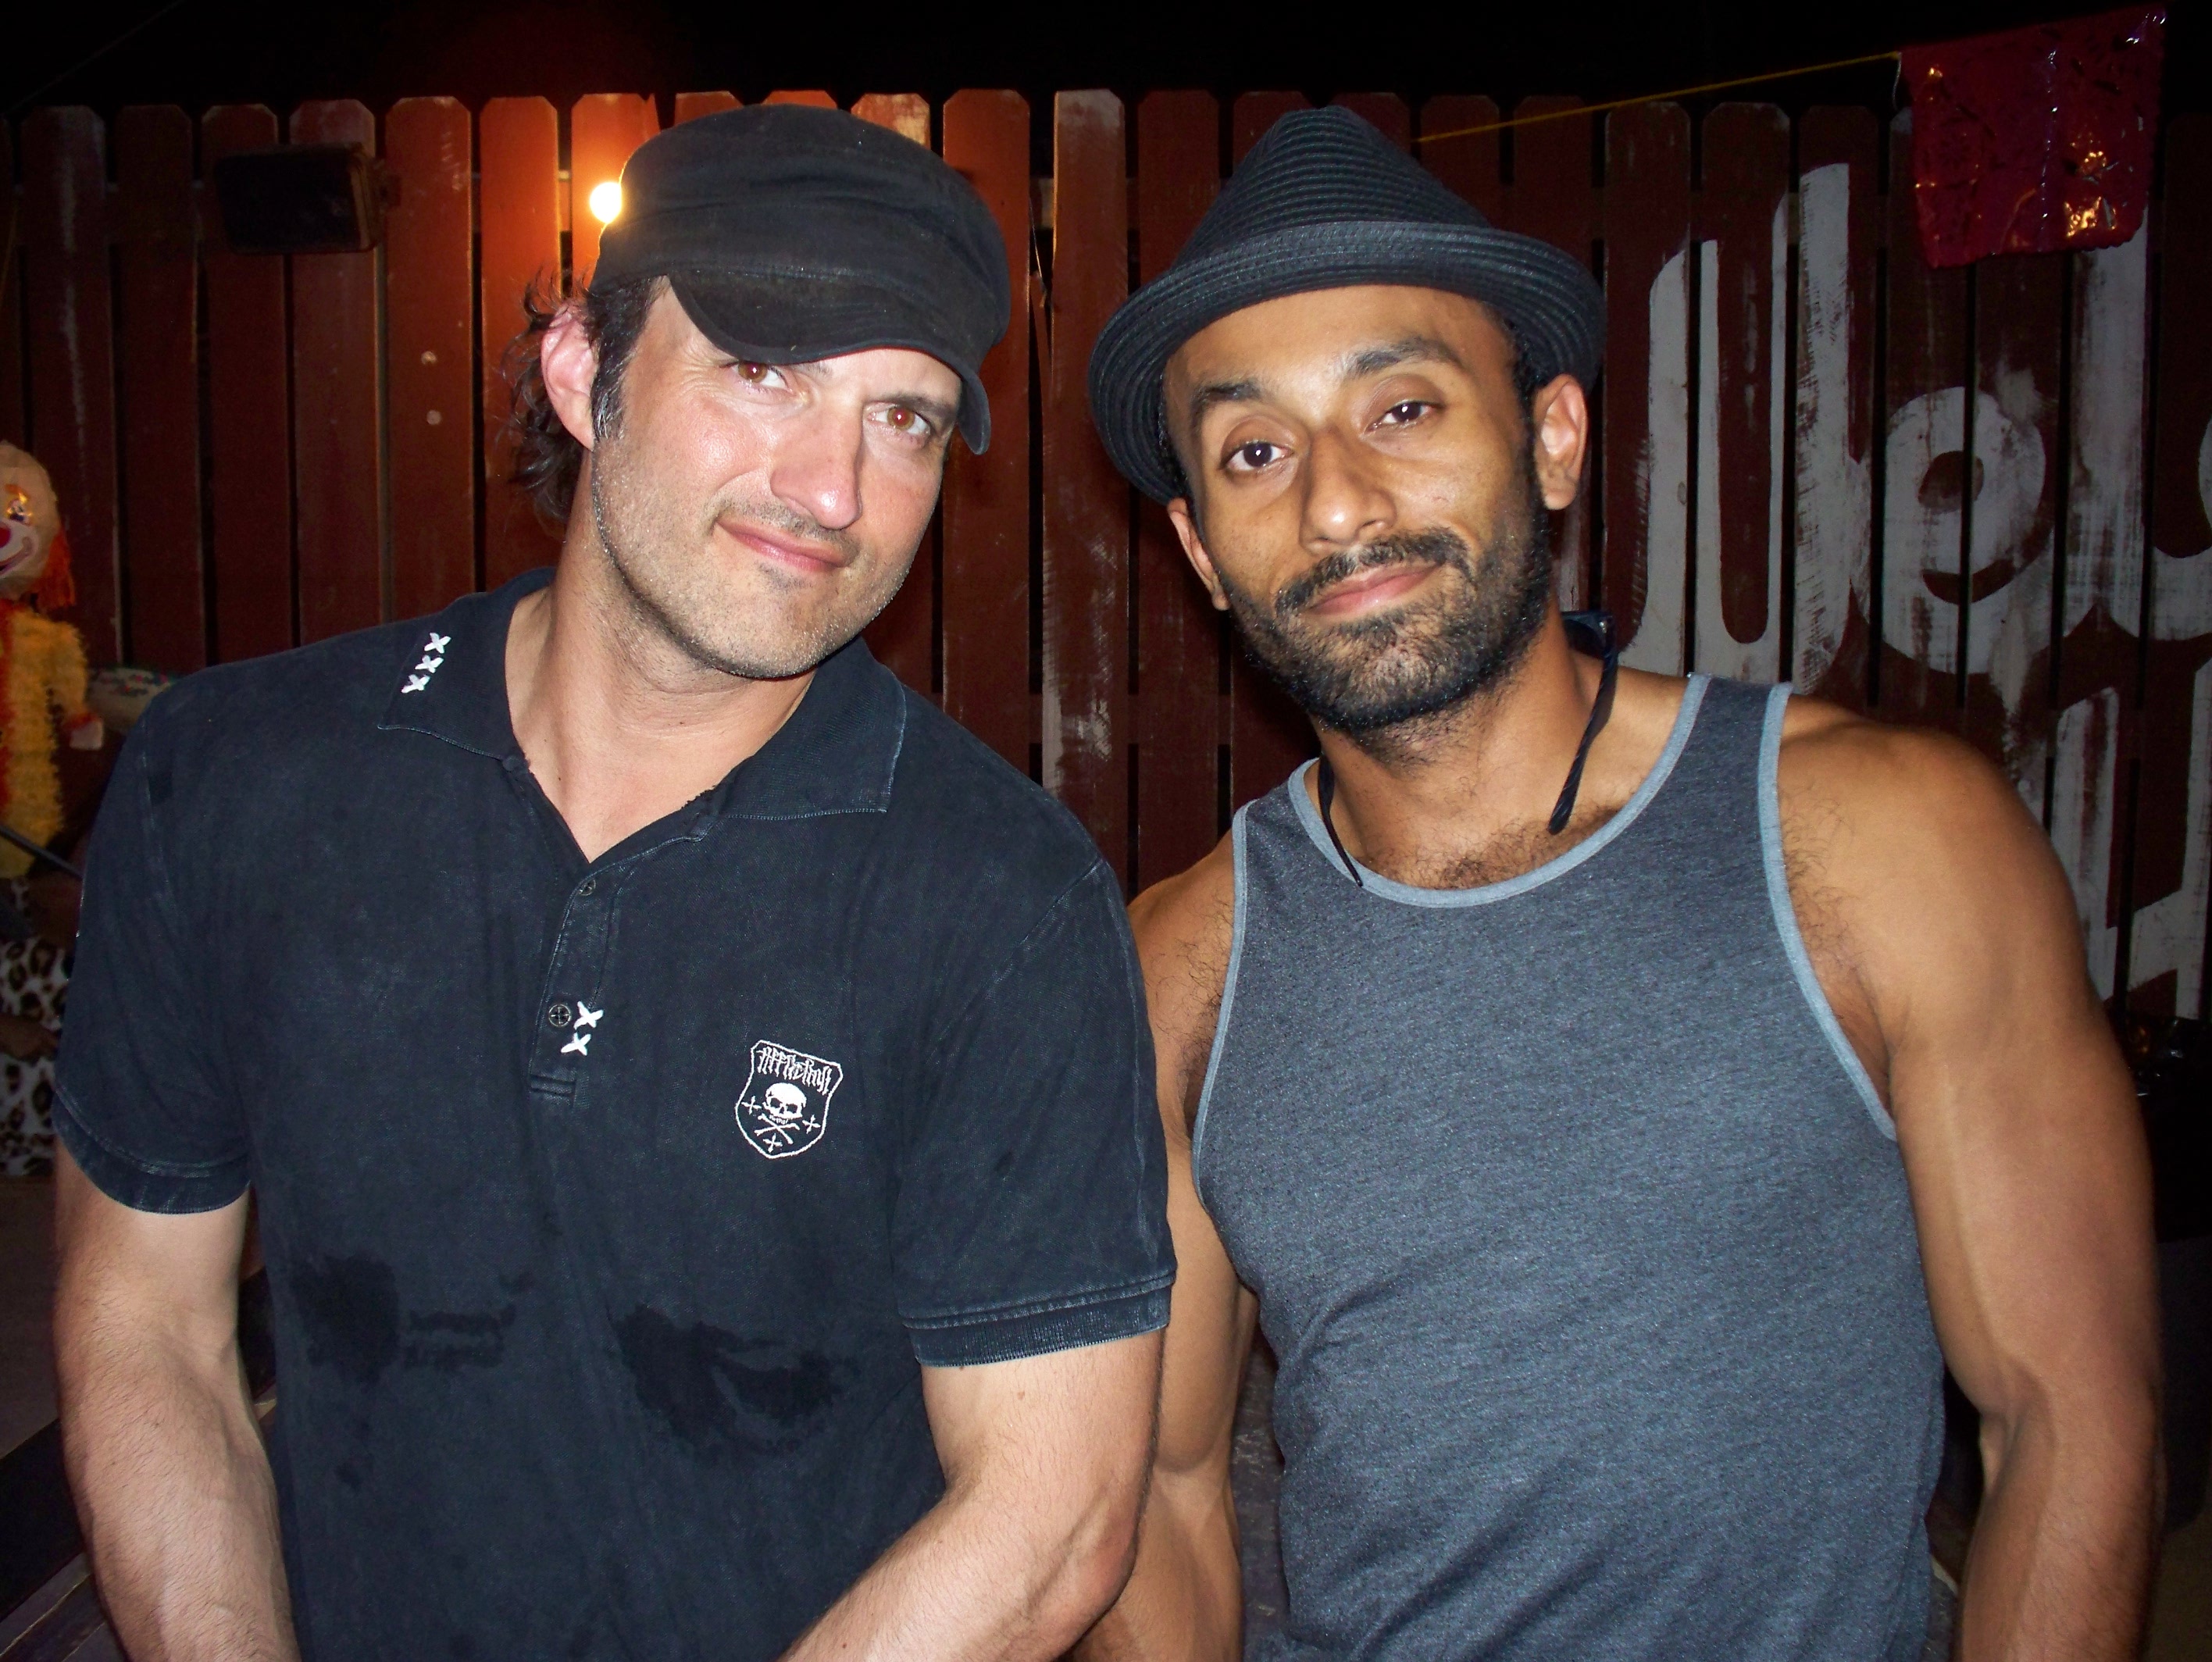 Director, screenwriter, producer, cinematographer, editor and musician Robert Rodriguez & actor Vincent Fuentes